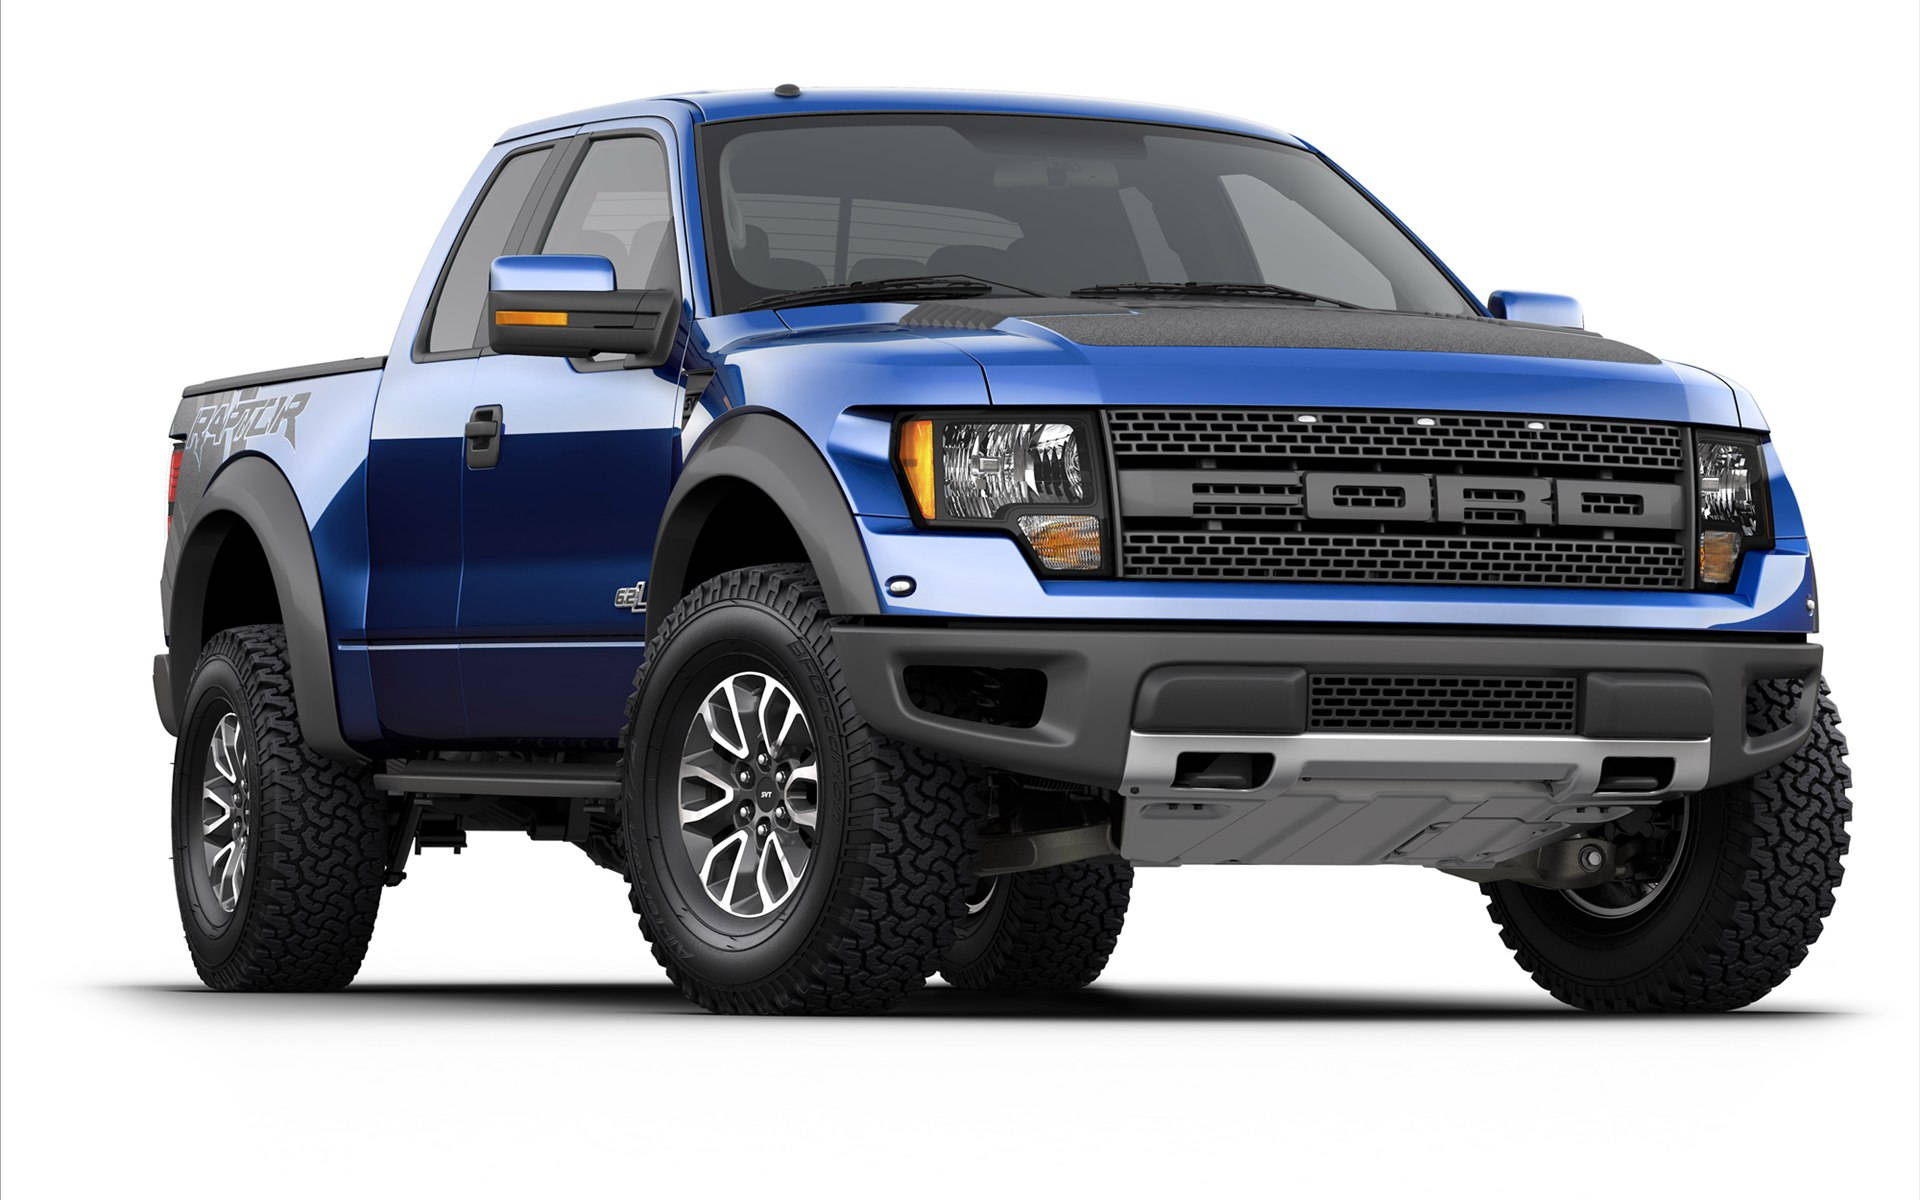 Ford Raptor F-150 Truck Picture